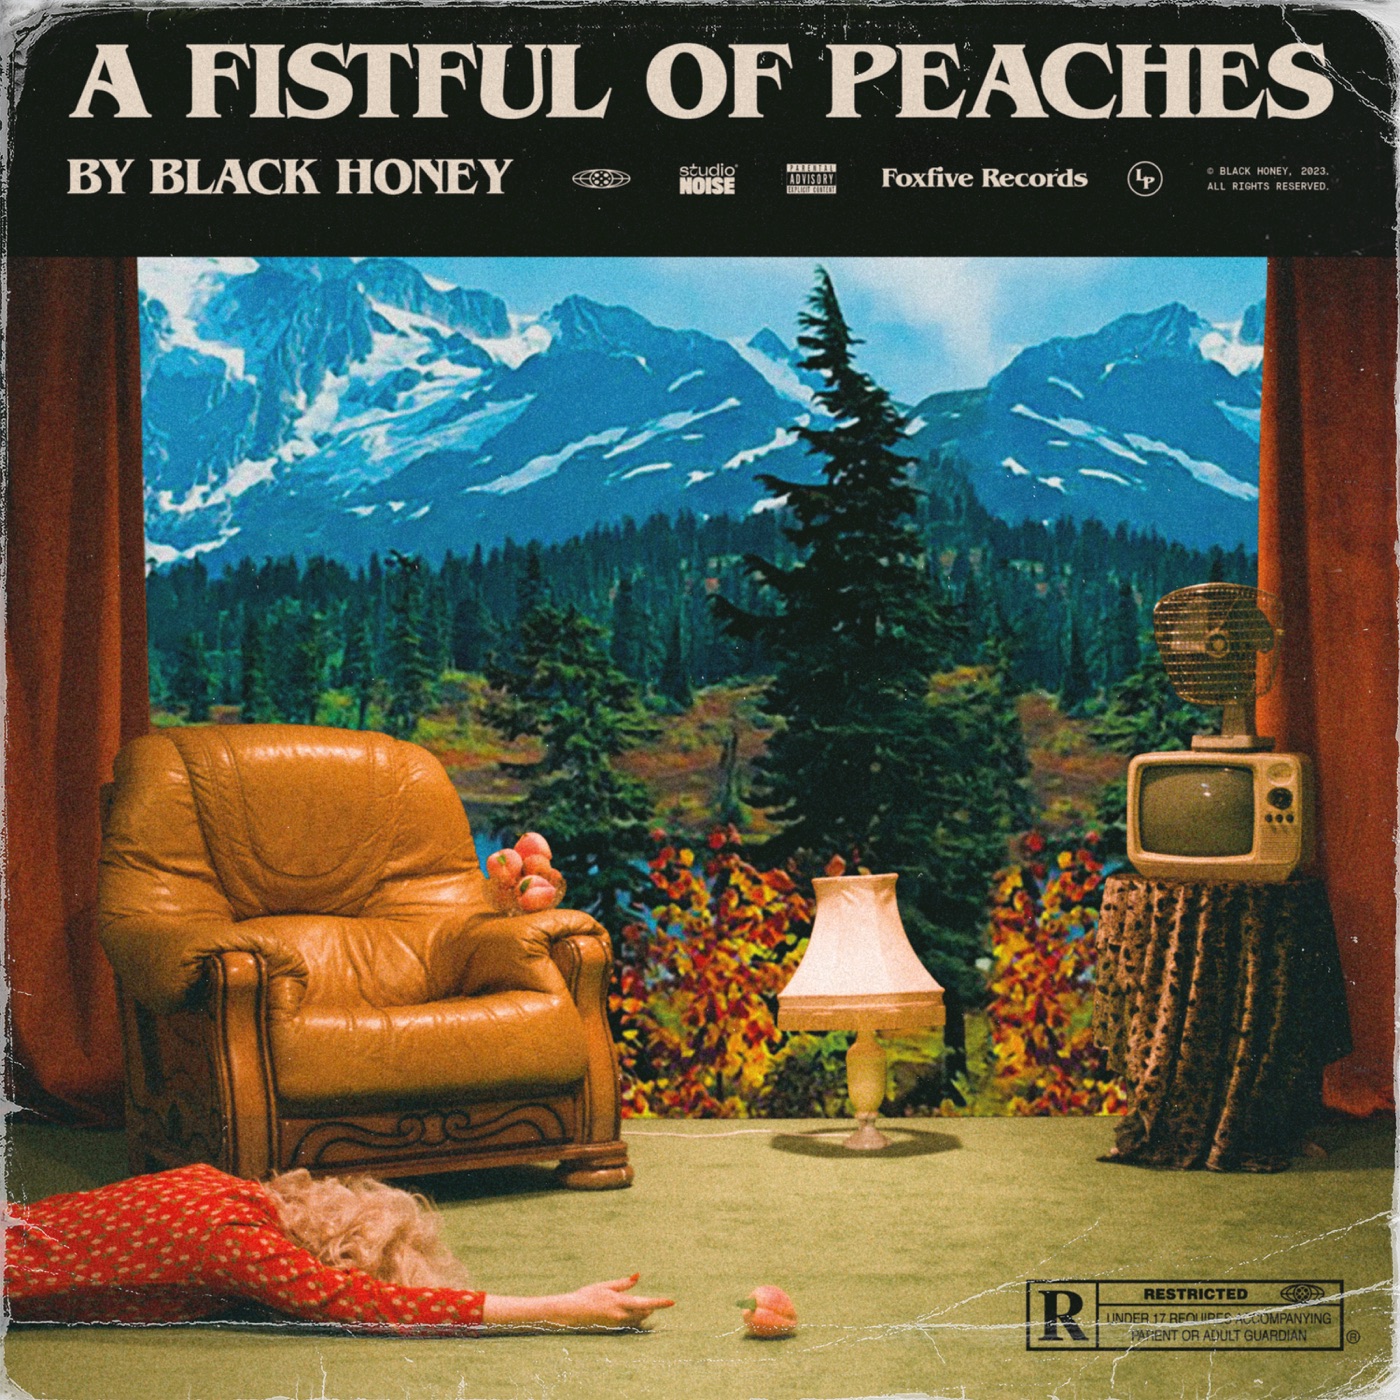 A Fistful of Peaches by Black Honey